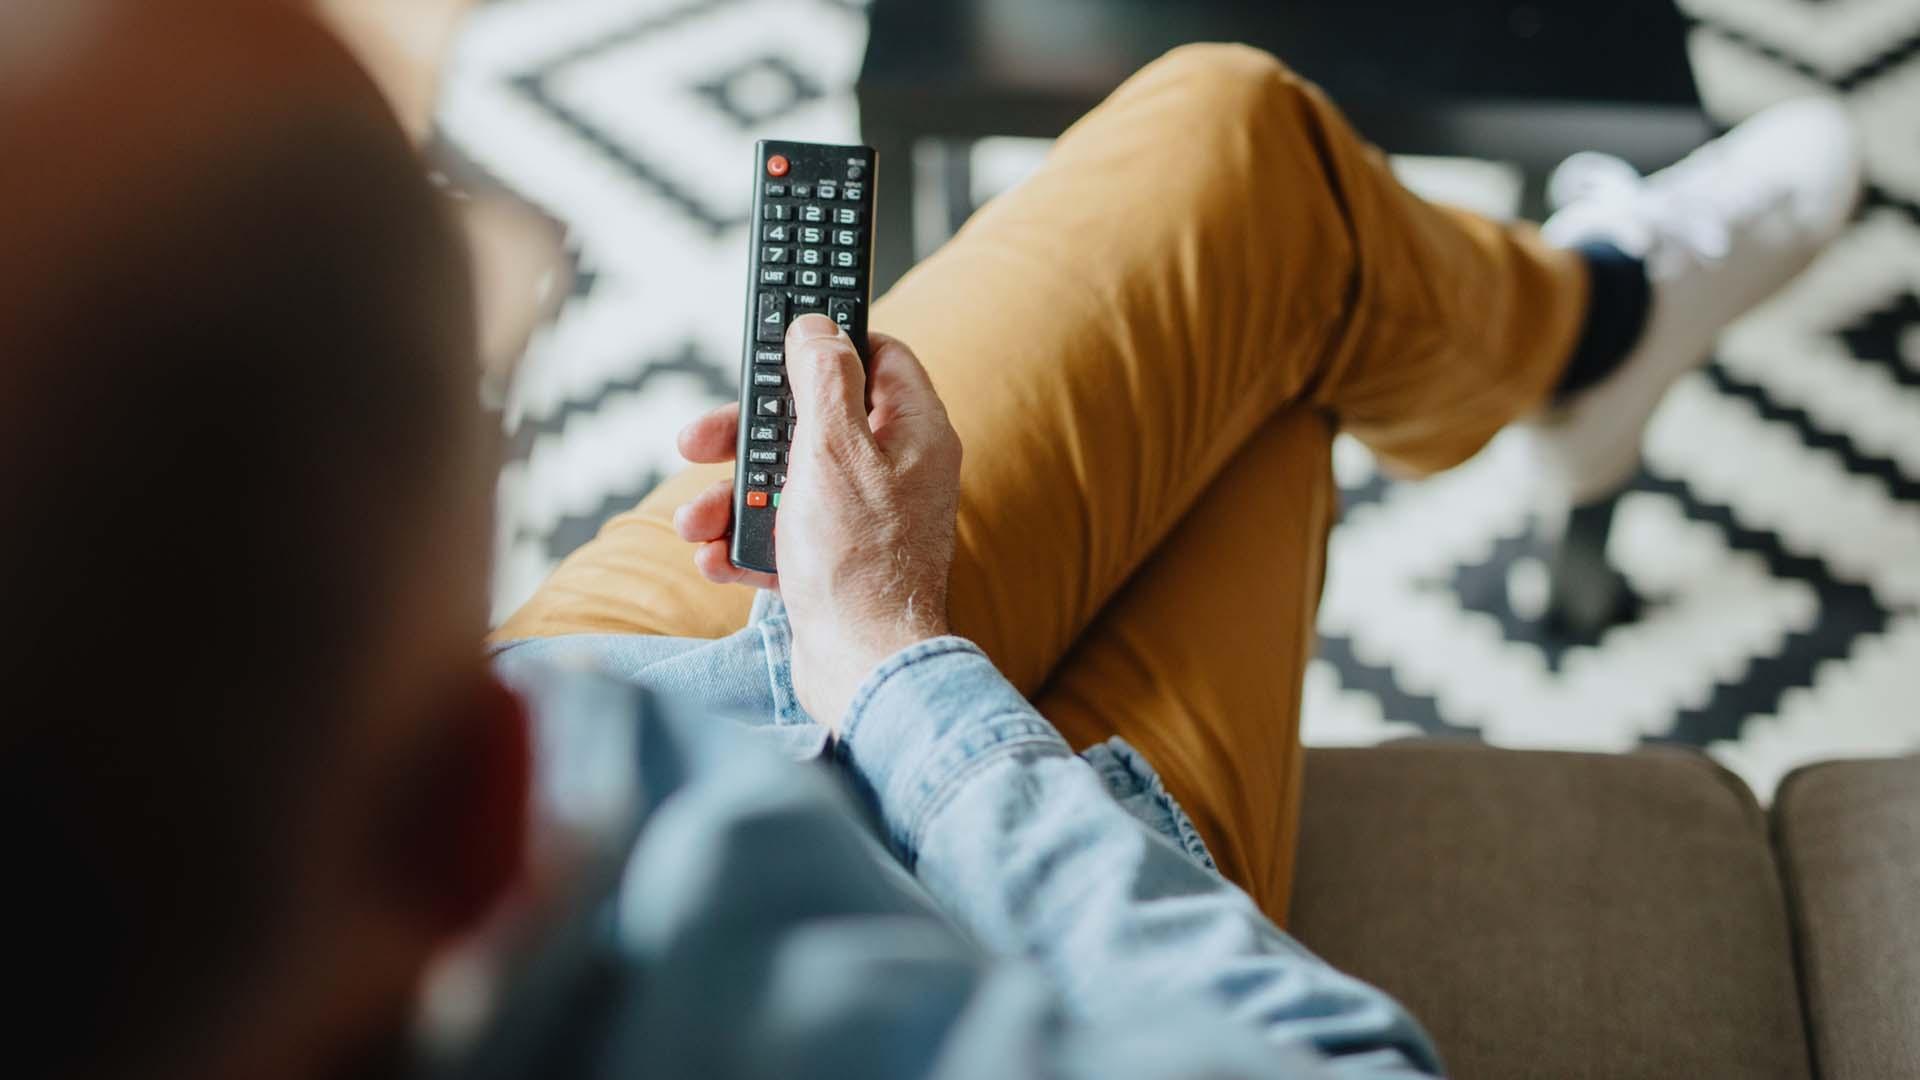 Man holding a tv remote